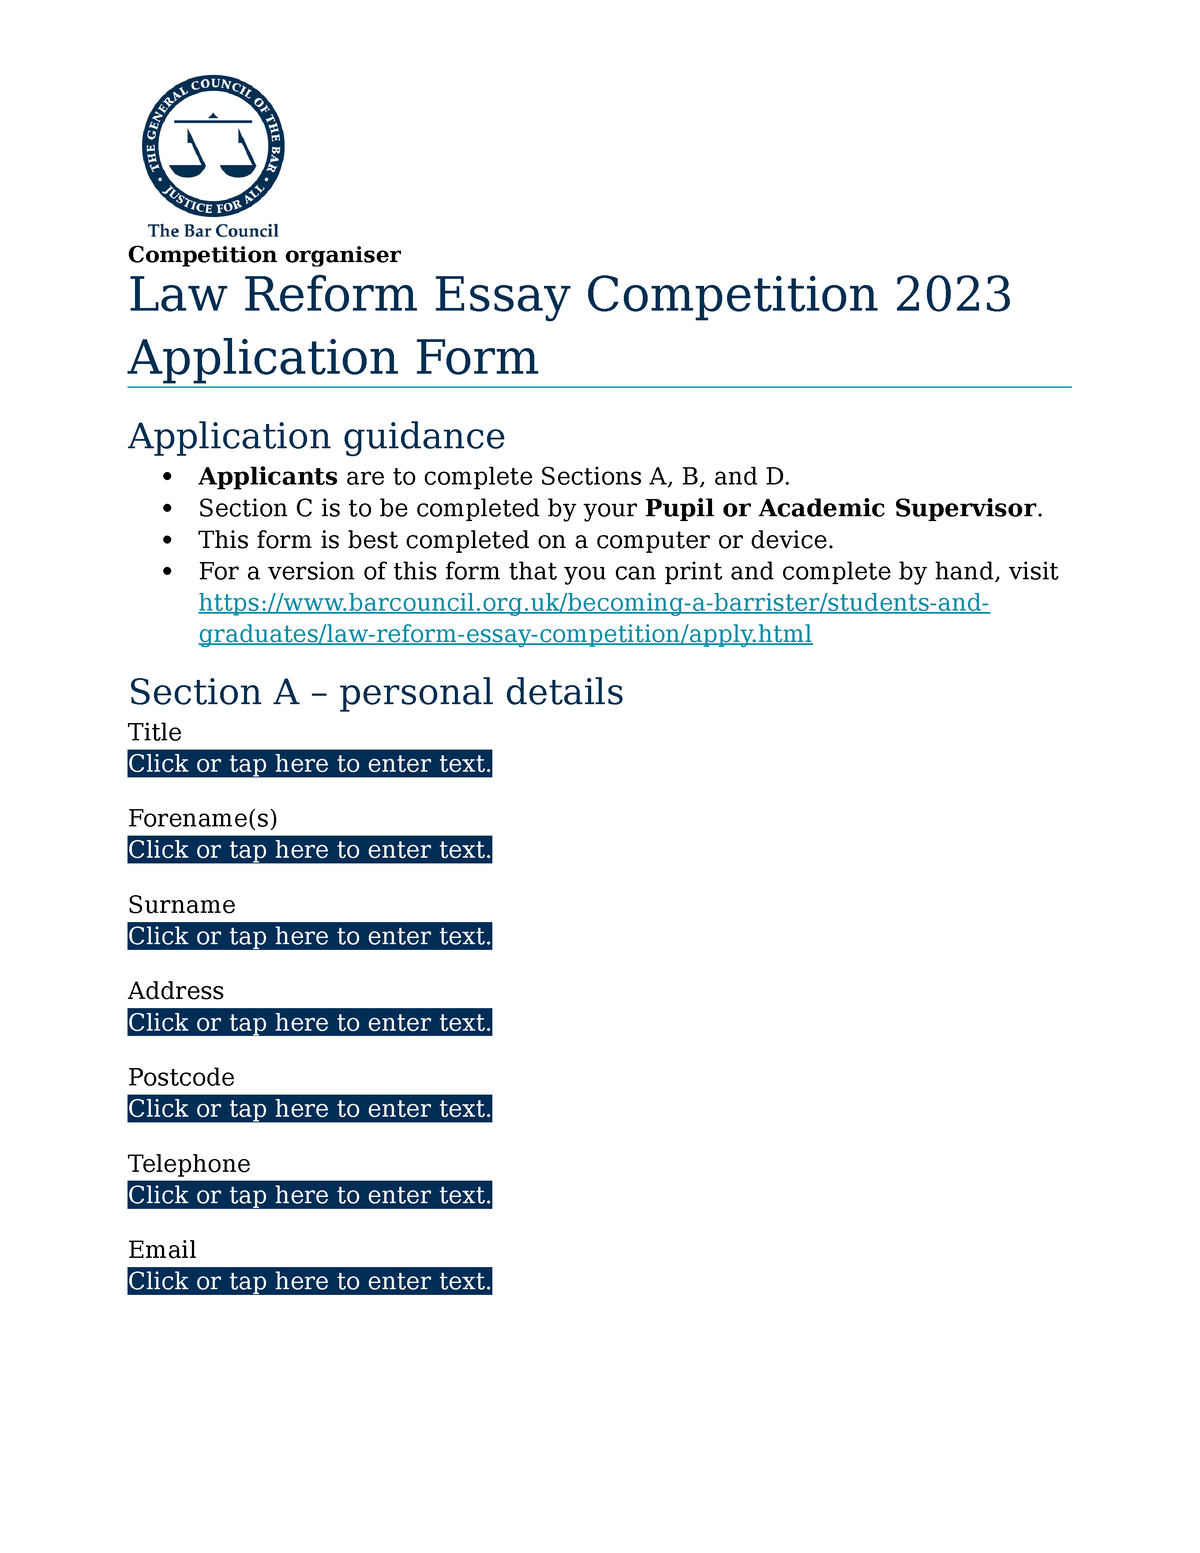 law reform essay competition 2023